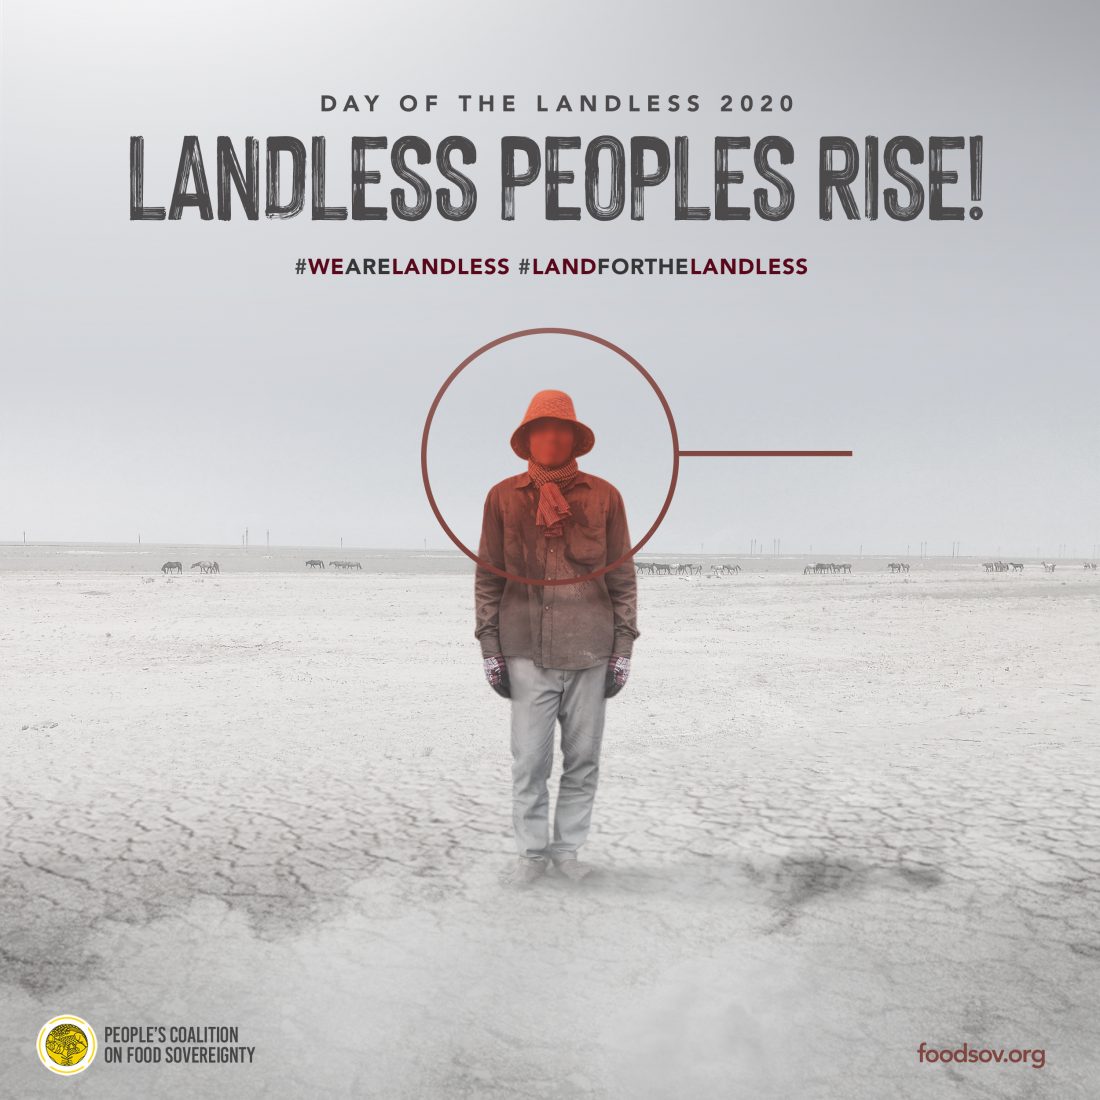 Day of the Landless 2020:  Landless peoples of the world, rise!